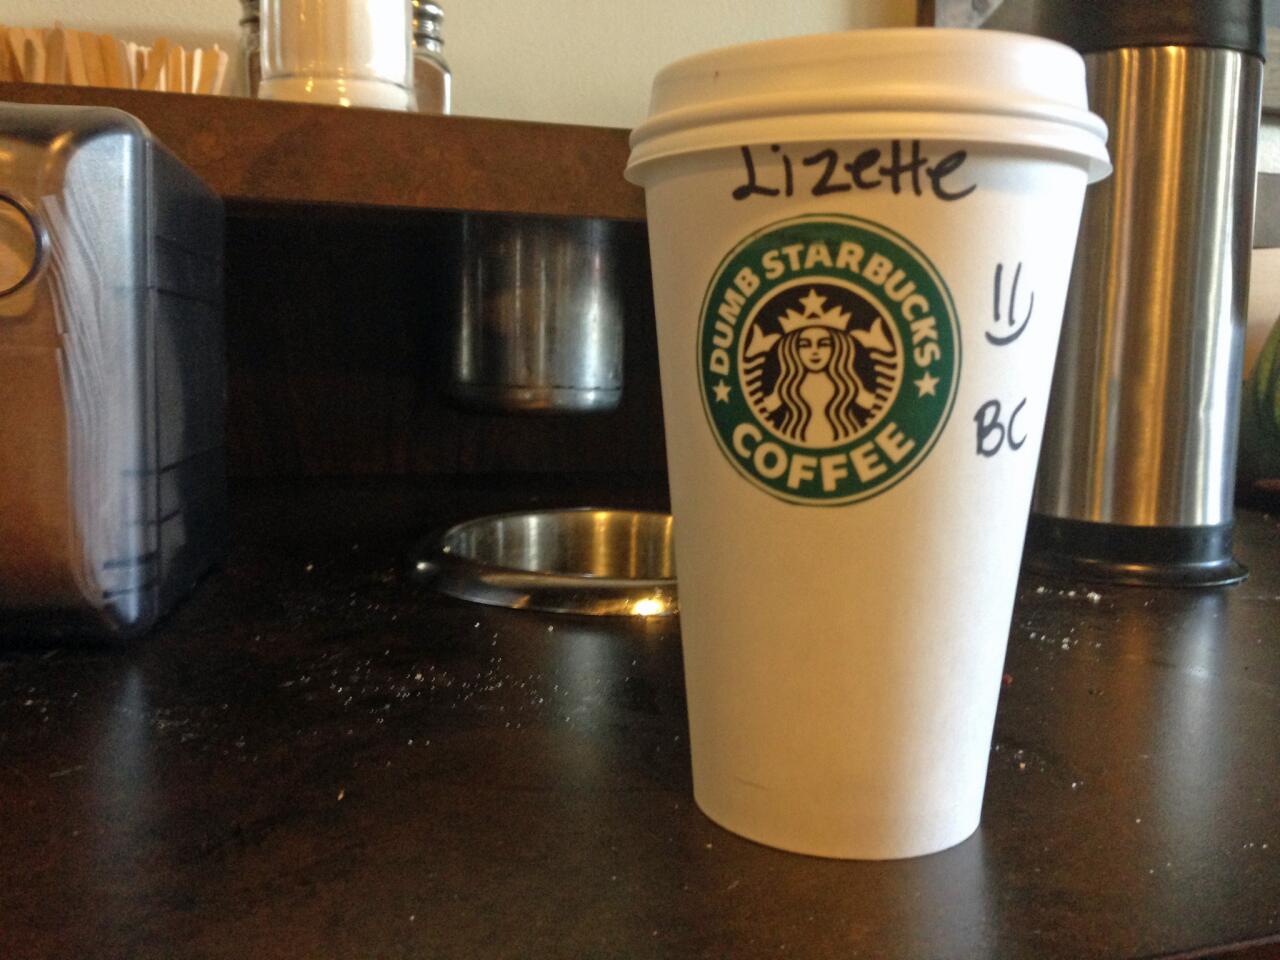 A Dumb Starbucks cup with its pasted-on sticker.